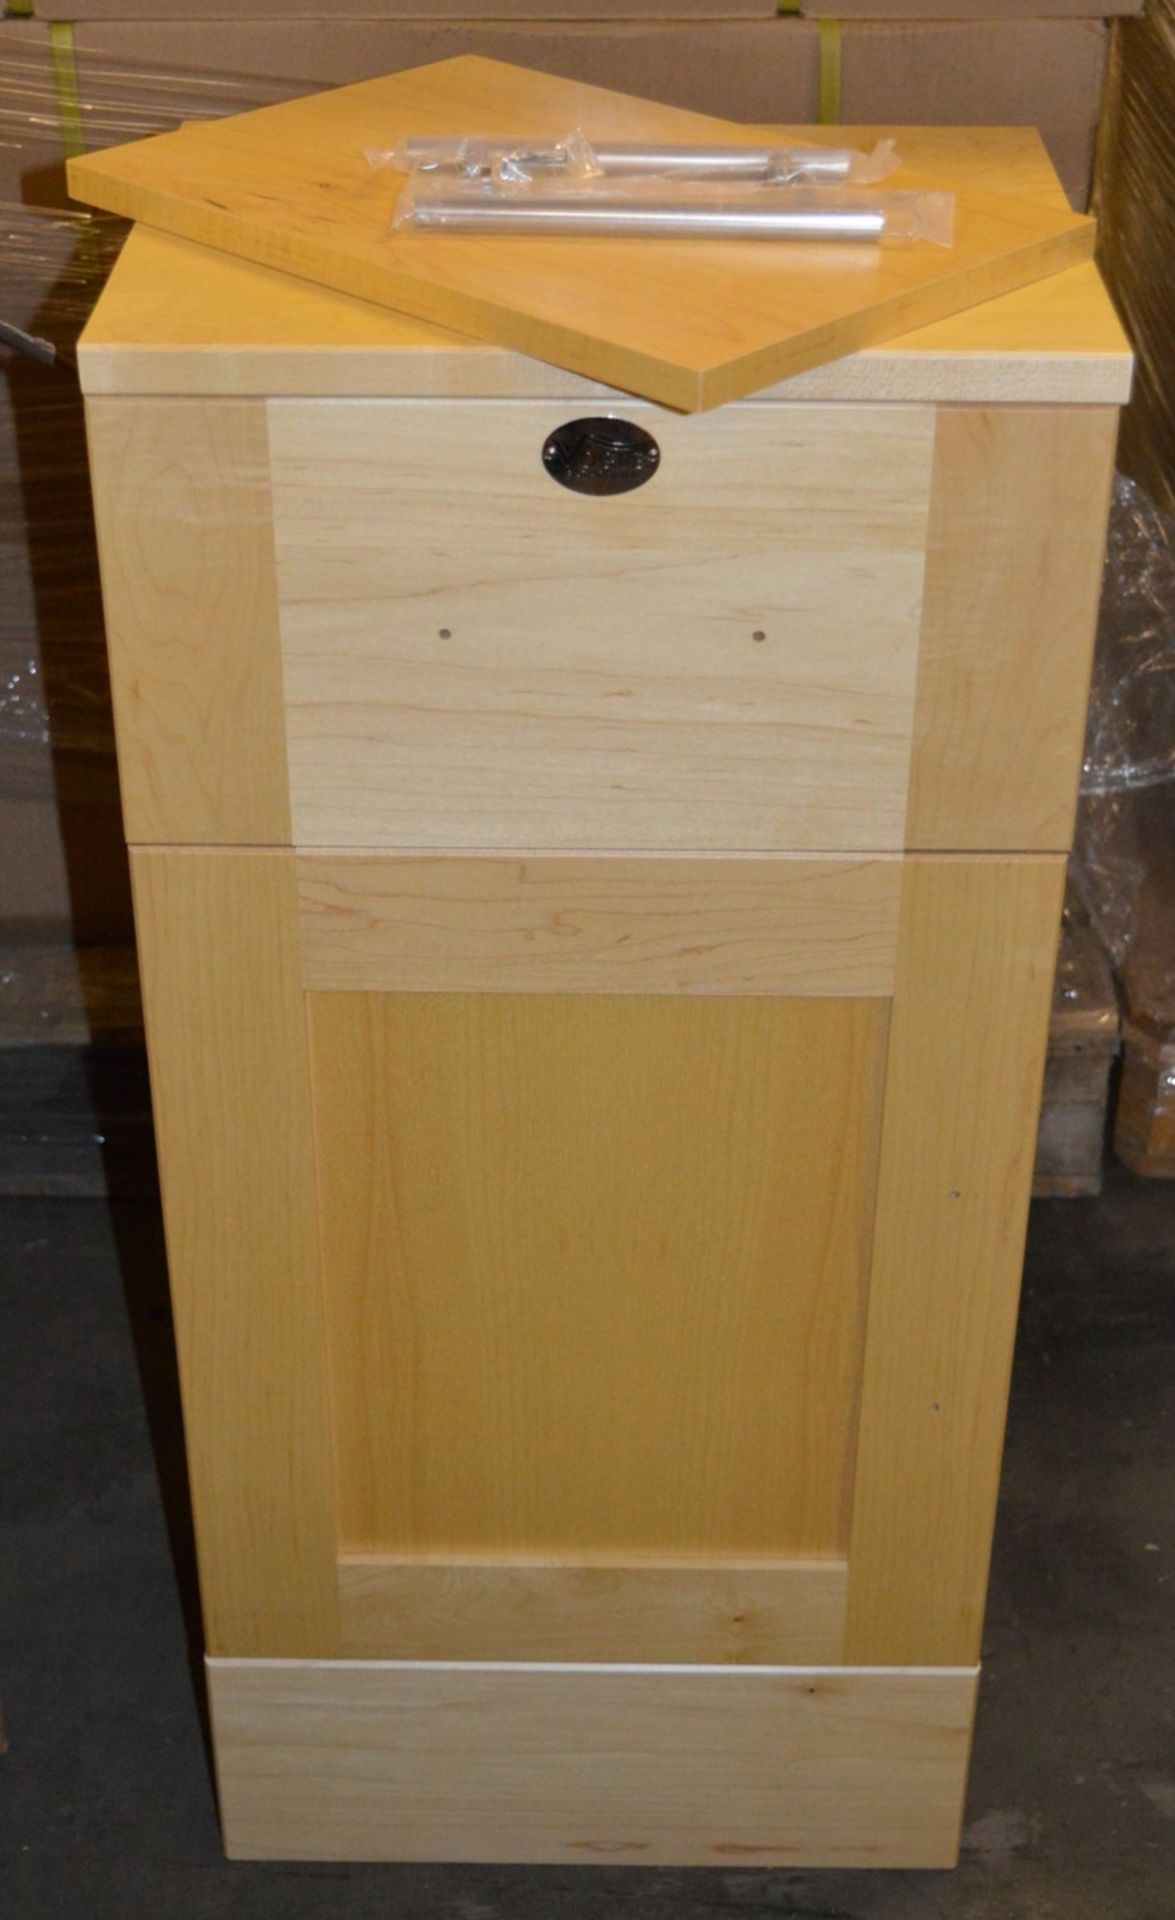 1 x Vogue Bathrooms KUDOS Bathroom Storage Cabinet - 400mm Width - Maple Shaker Style - CL034 - - Image 8 of 8